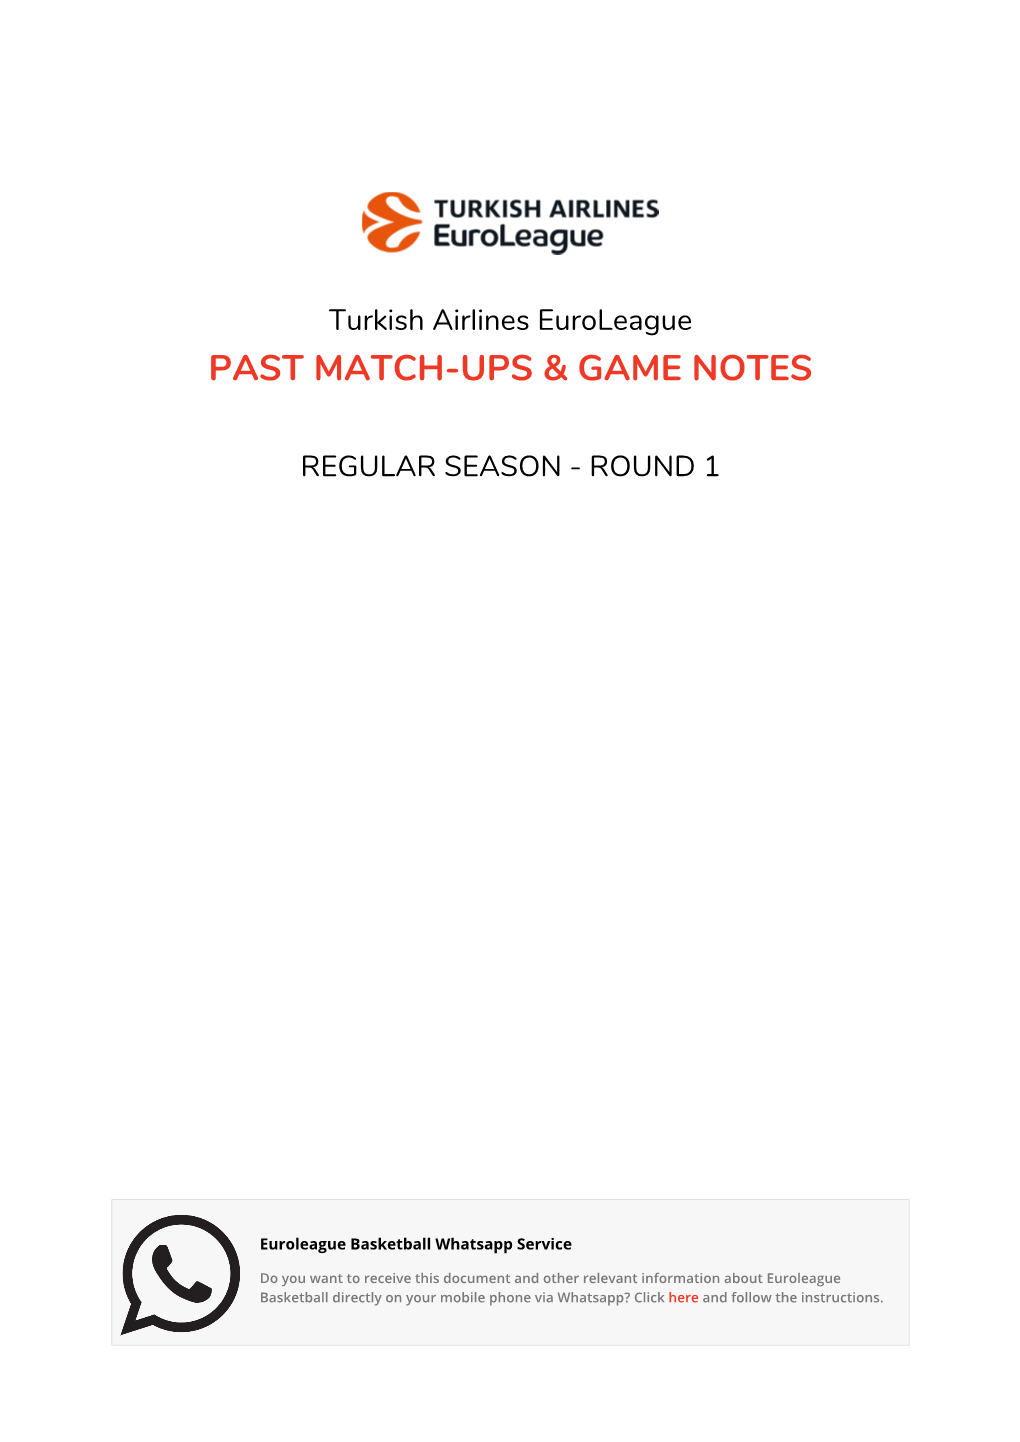 Turkish Airlines Euroleague PAST MATCH-UPS & GAME NOTES